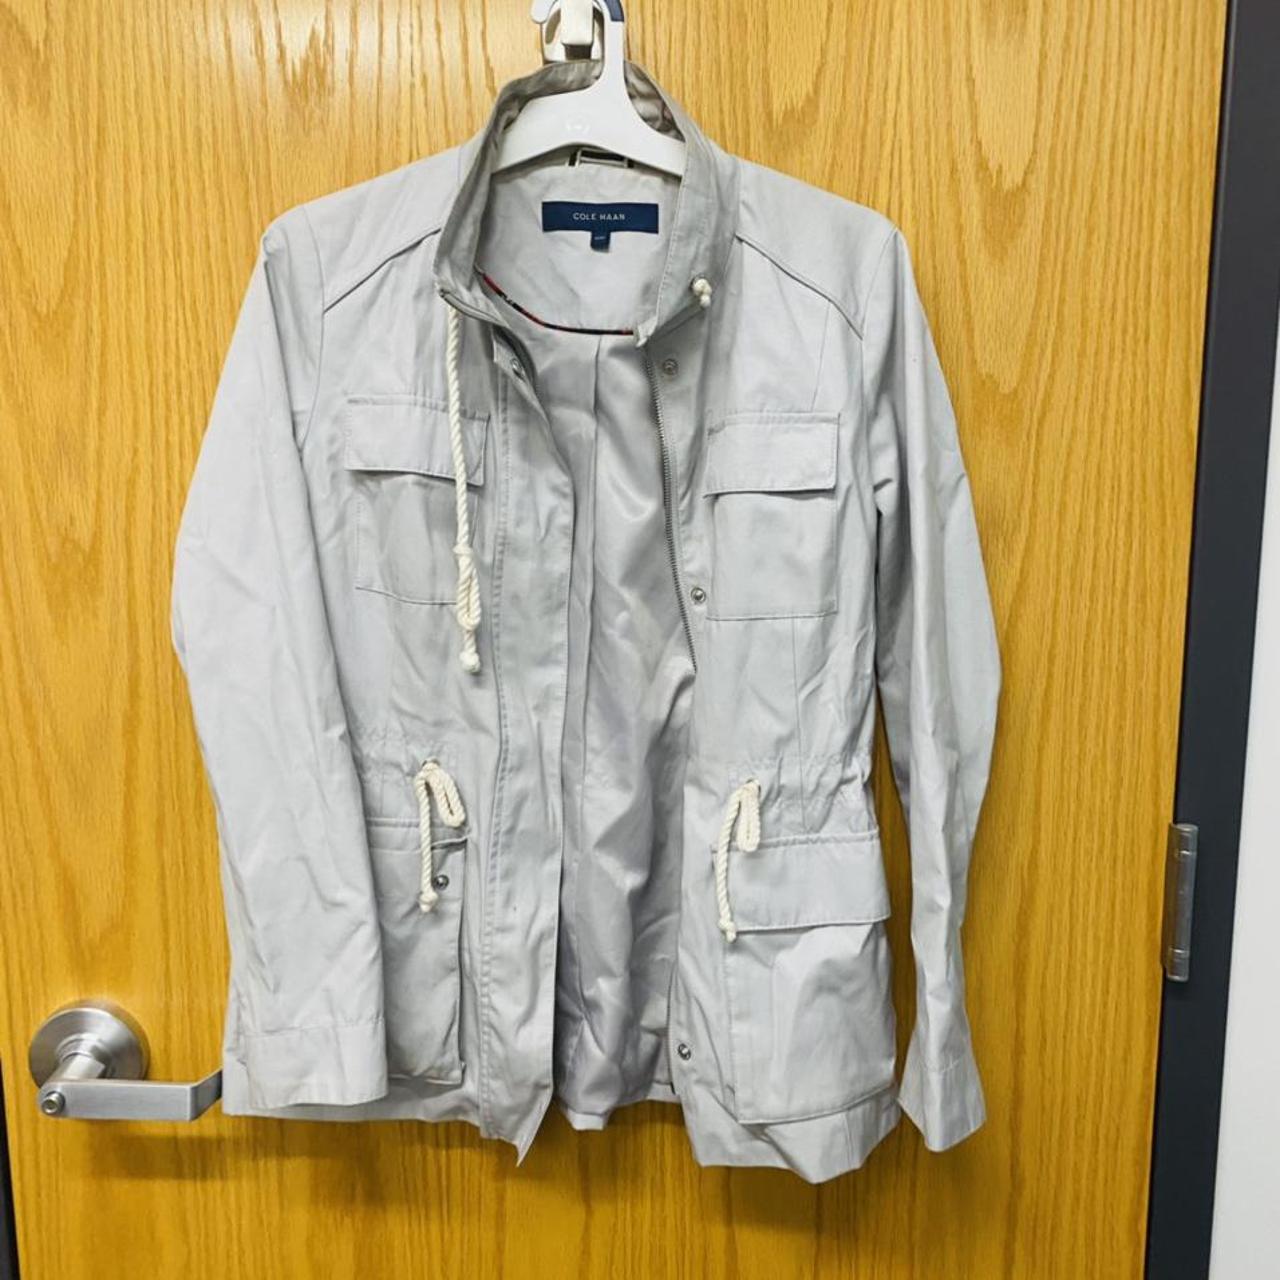 Product Image 1 - Cole haan jacket